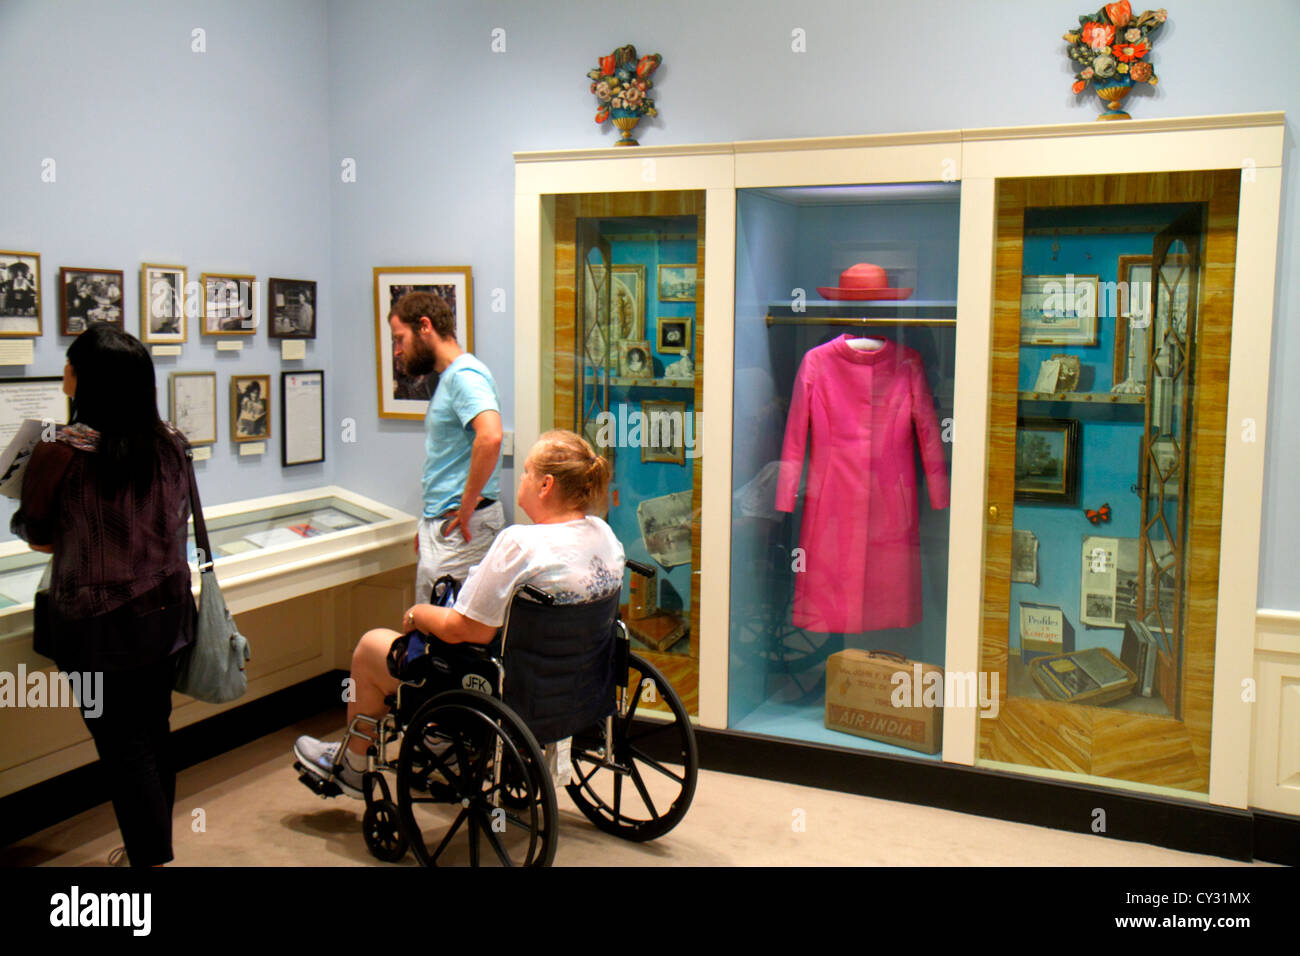 Boston Massachusetts, South Boston, JFK, John F. Kennedy Presidential Library & Museum, collection d'exposition Jackie, femme femme femme, fauteuil roulant, Banque D'Images